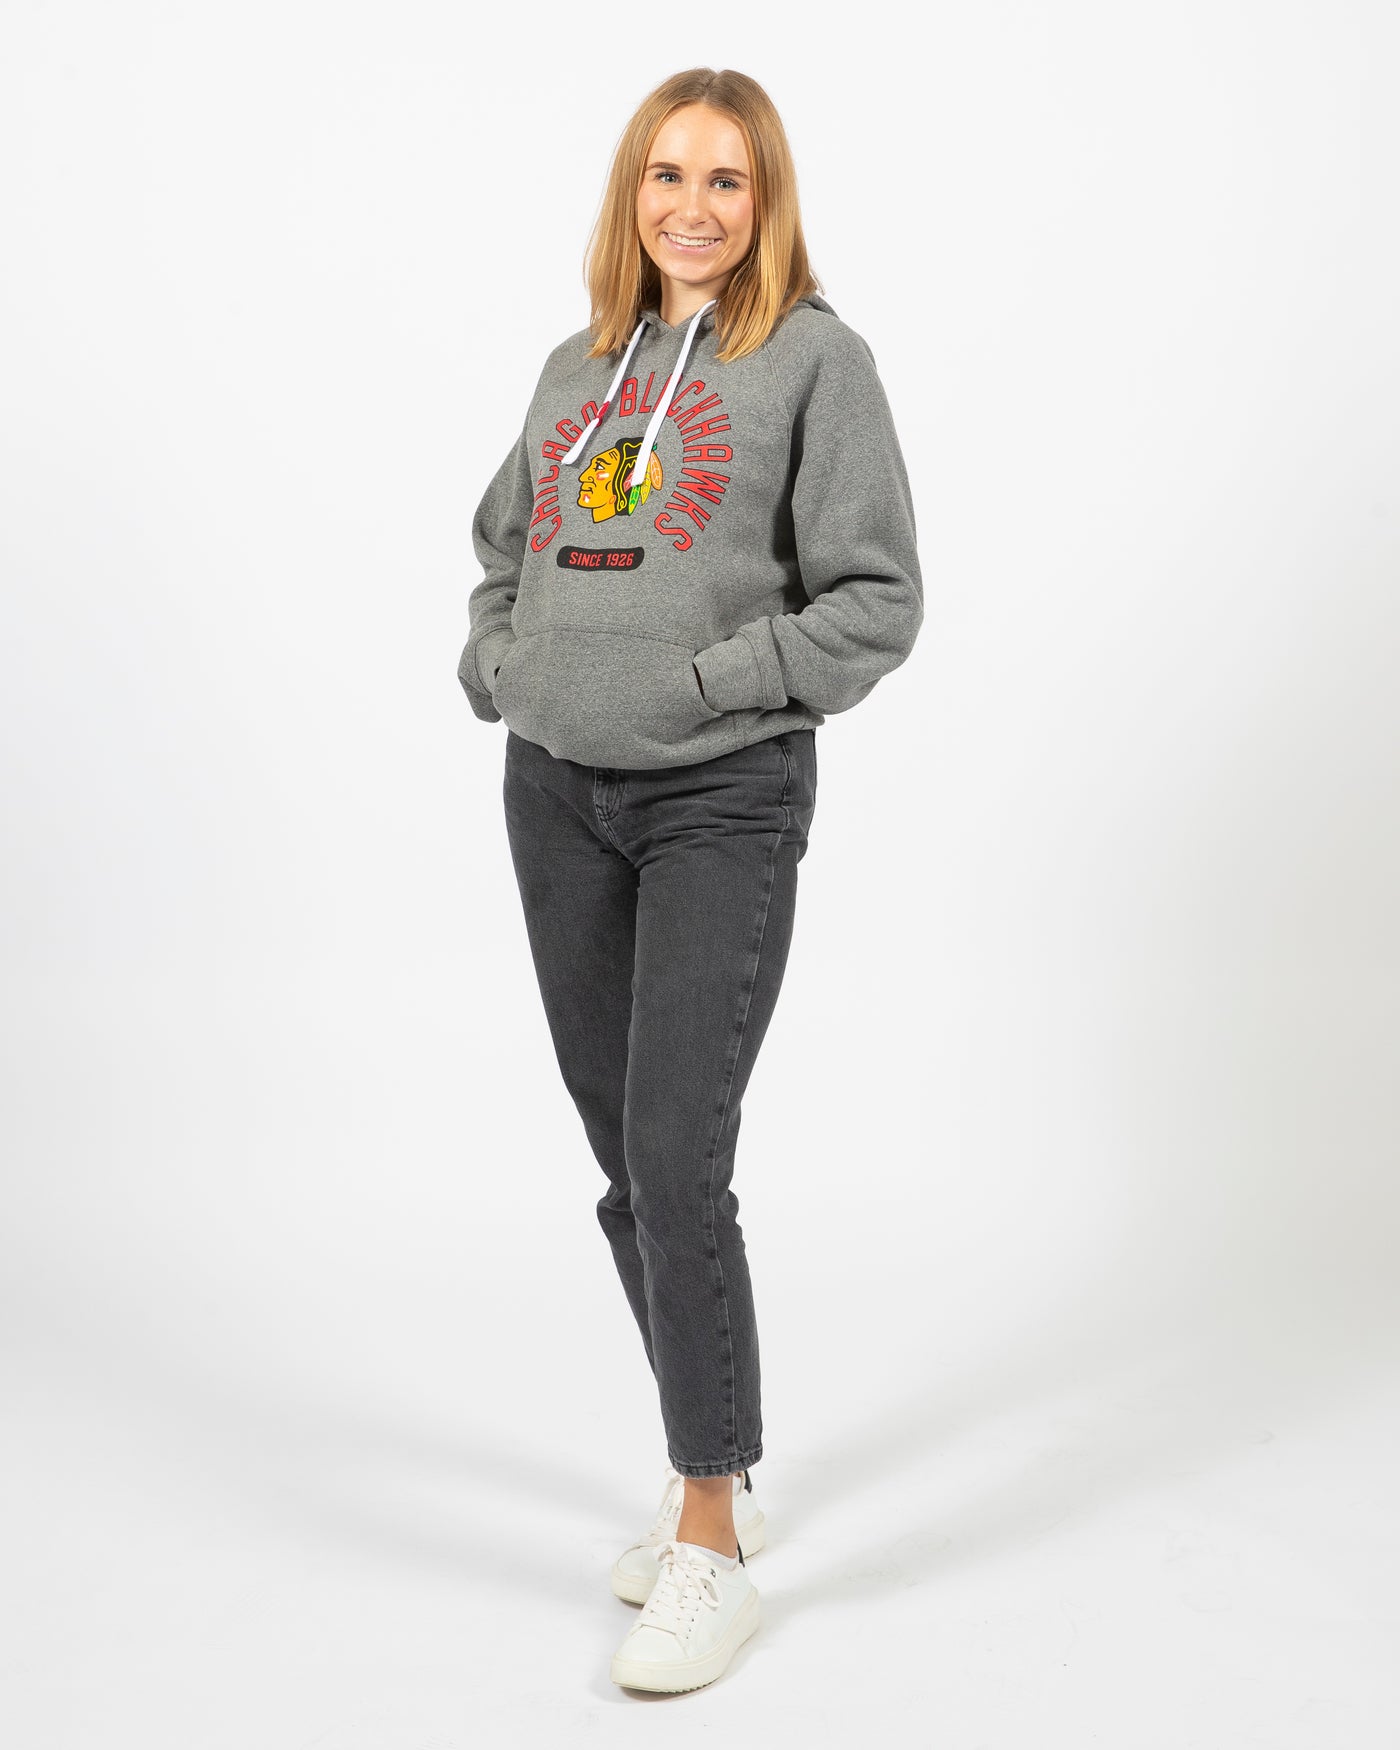 Sportiqe grey Chicago Blackhawks hoodie with primary logo and wordmark graphic on center chest - women's alt front view